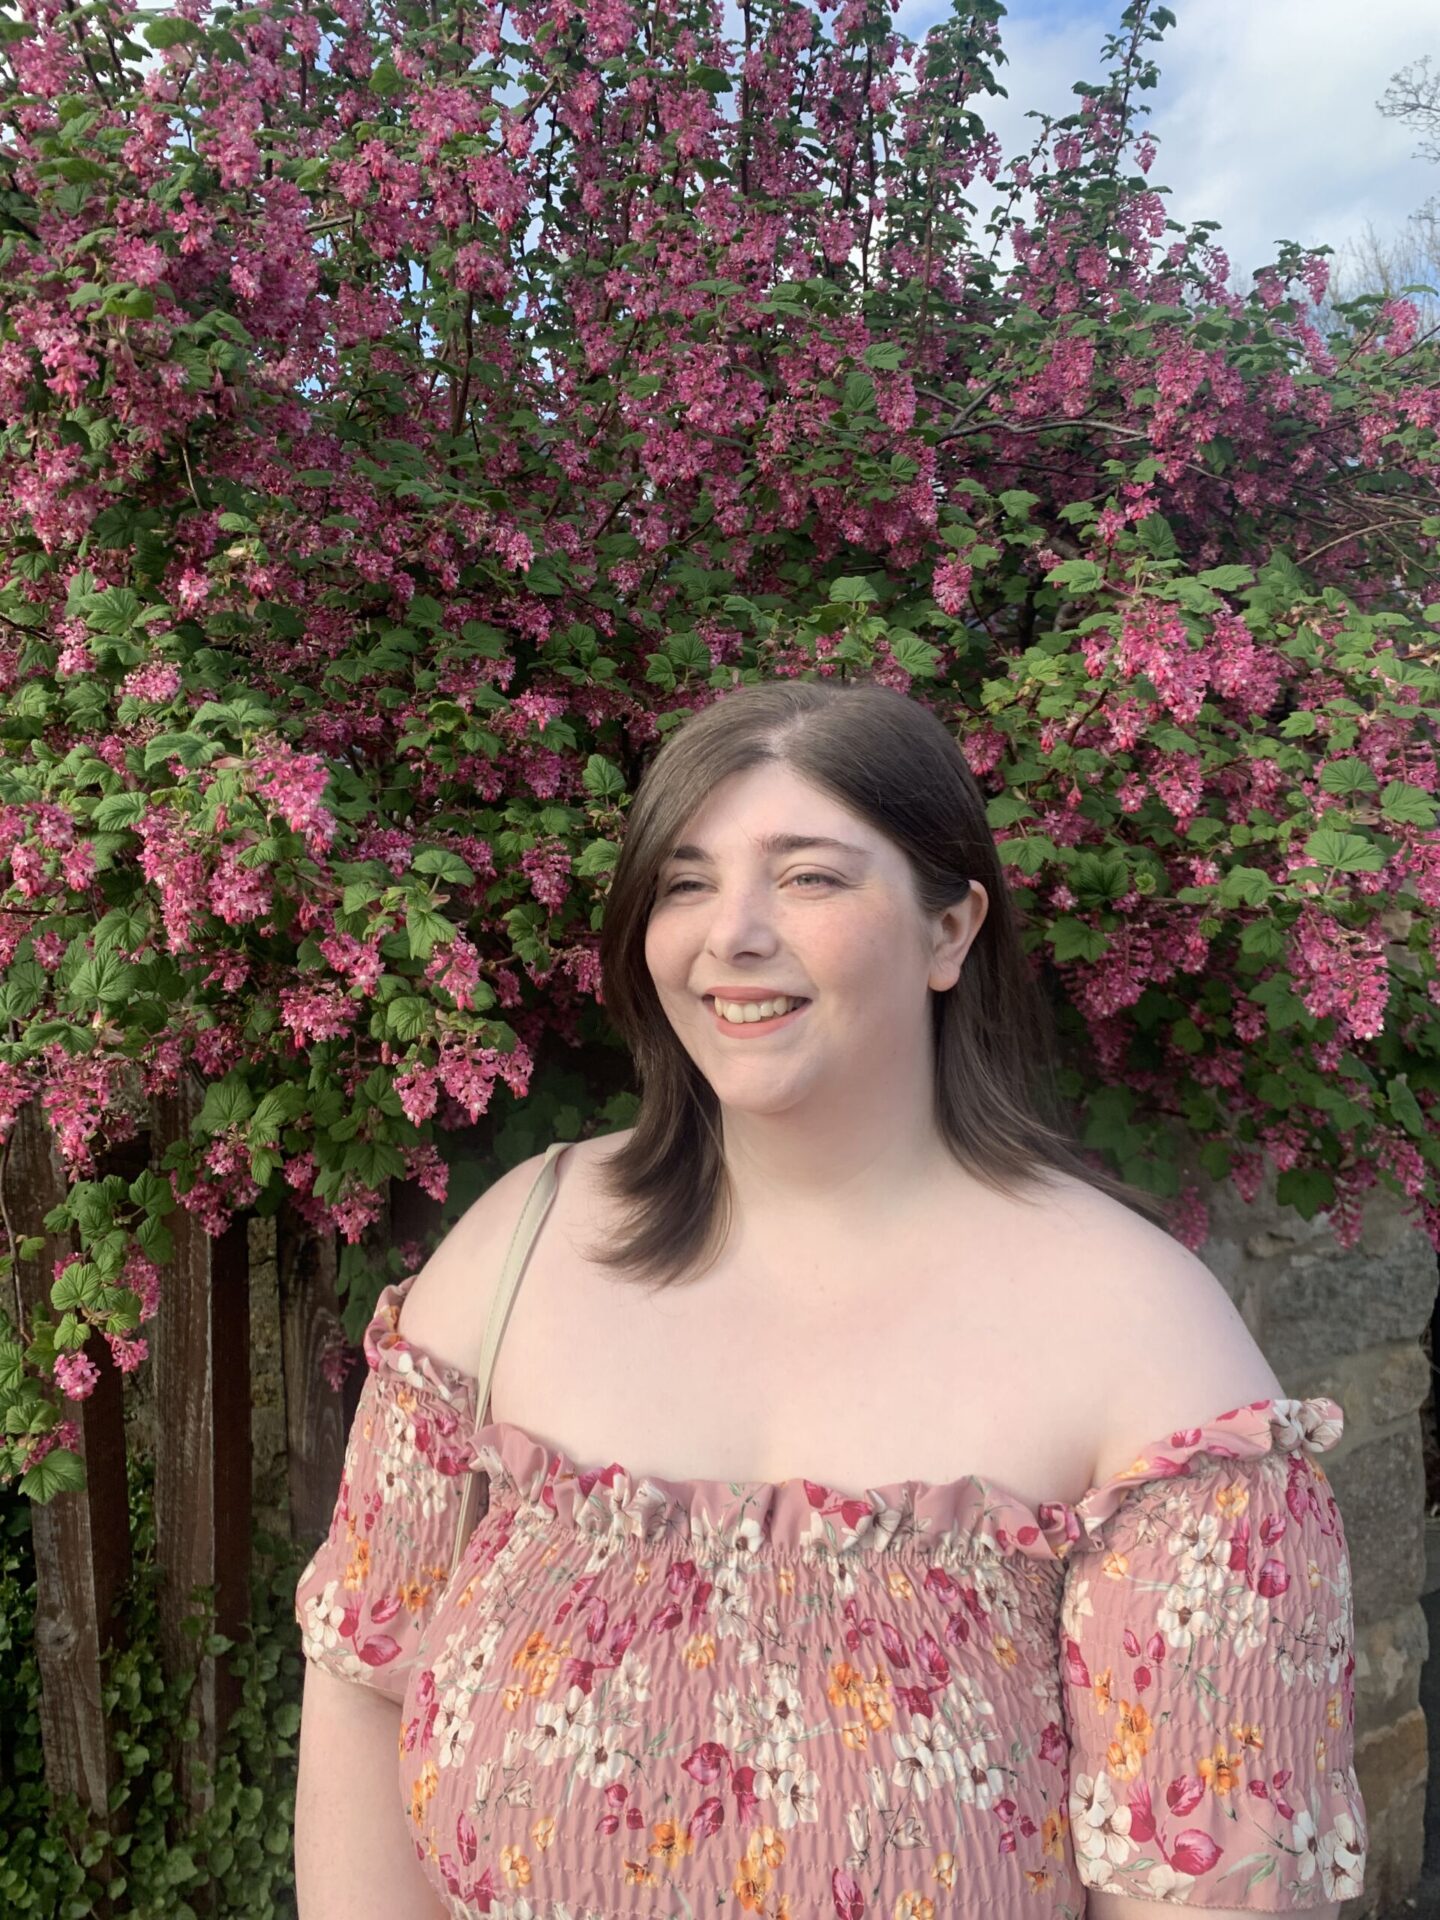 plus size brunette woman wearing a pink dress with white yellow and dark flowers on that stops at the shoulders and a neutral cream bag over her shoulder, standing in front of pink falling flowers.